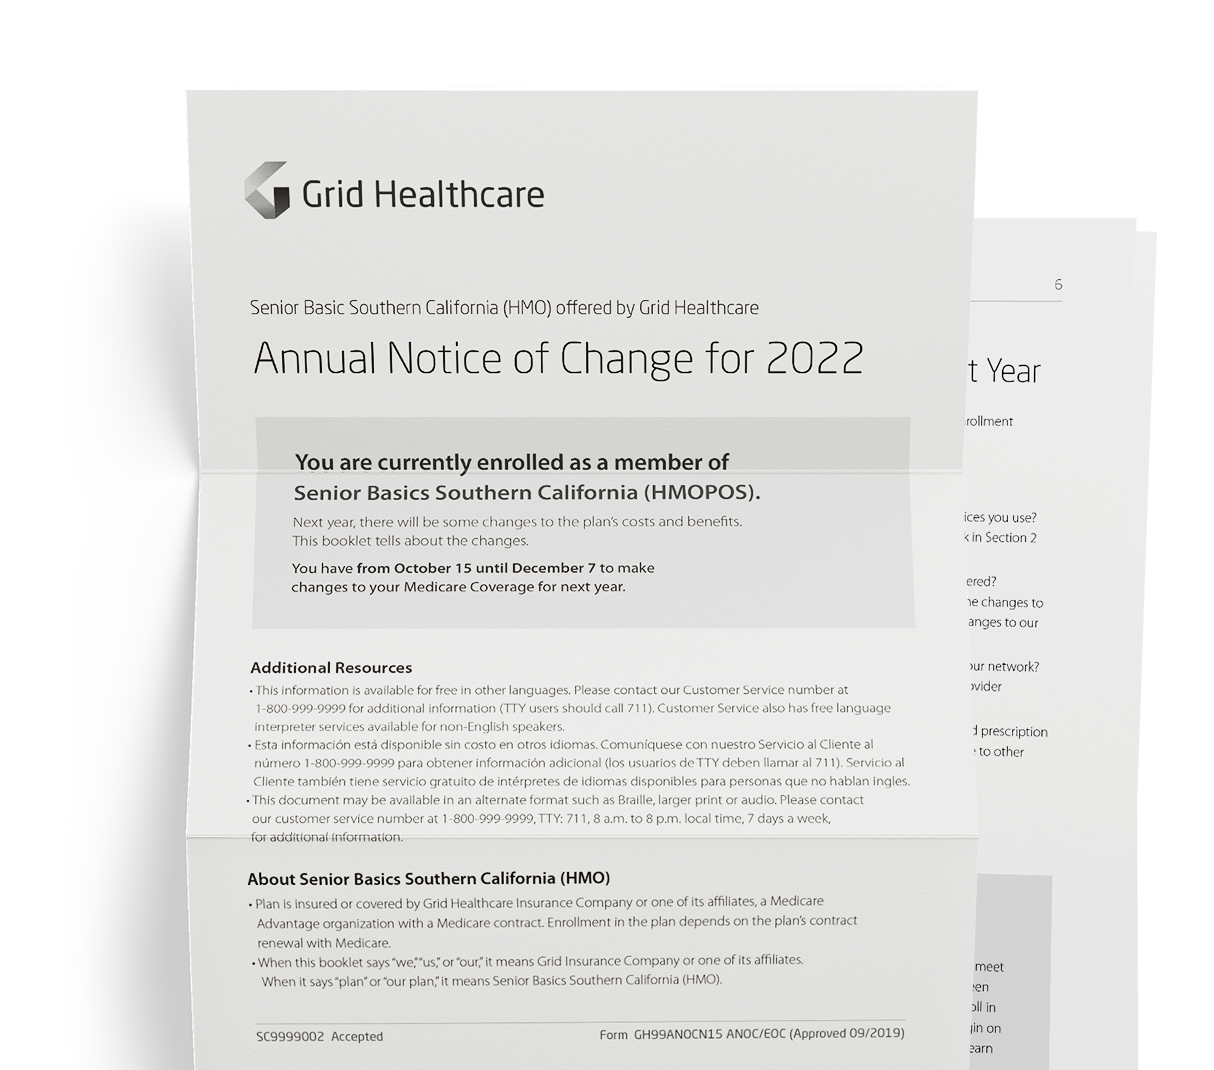 Annual Notice of Change document